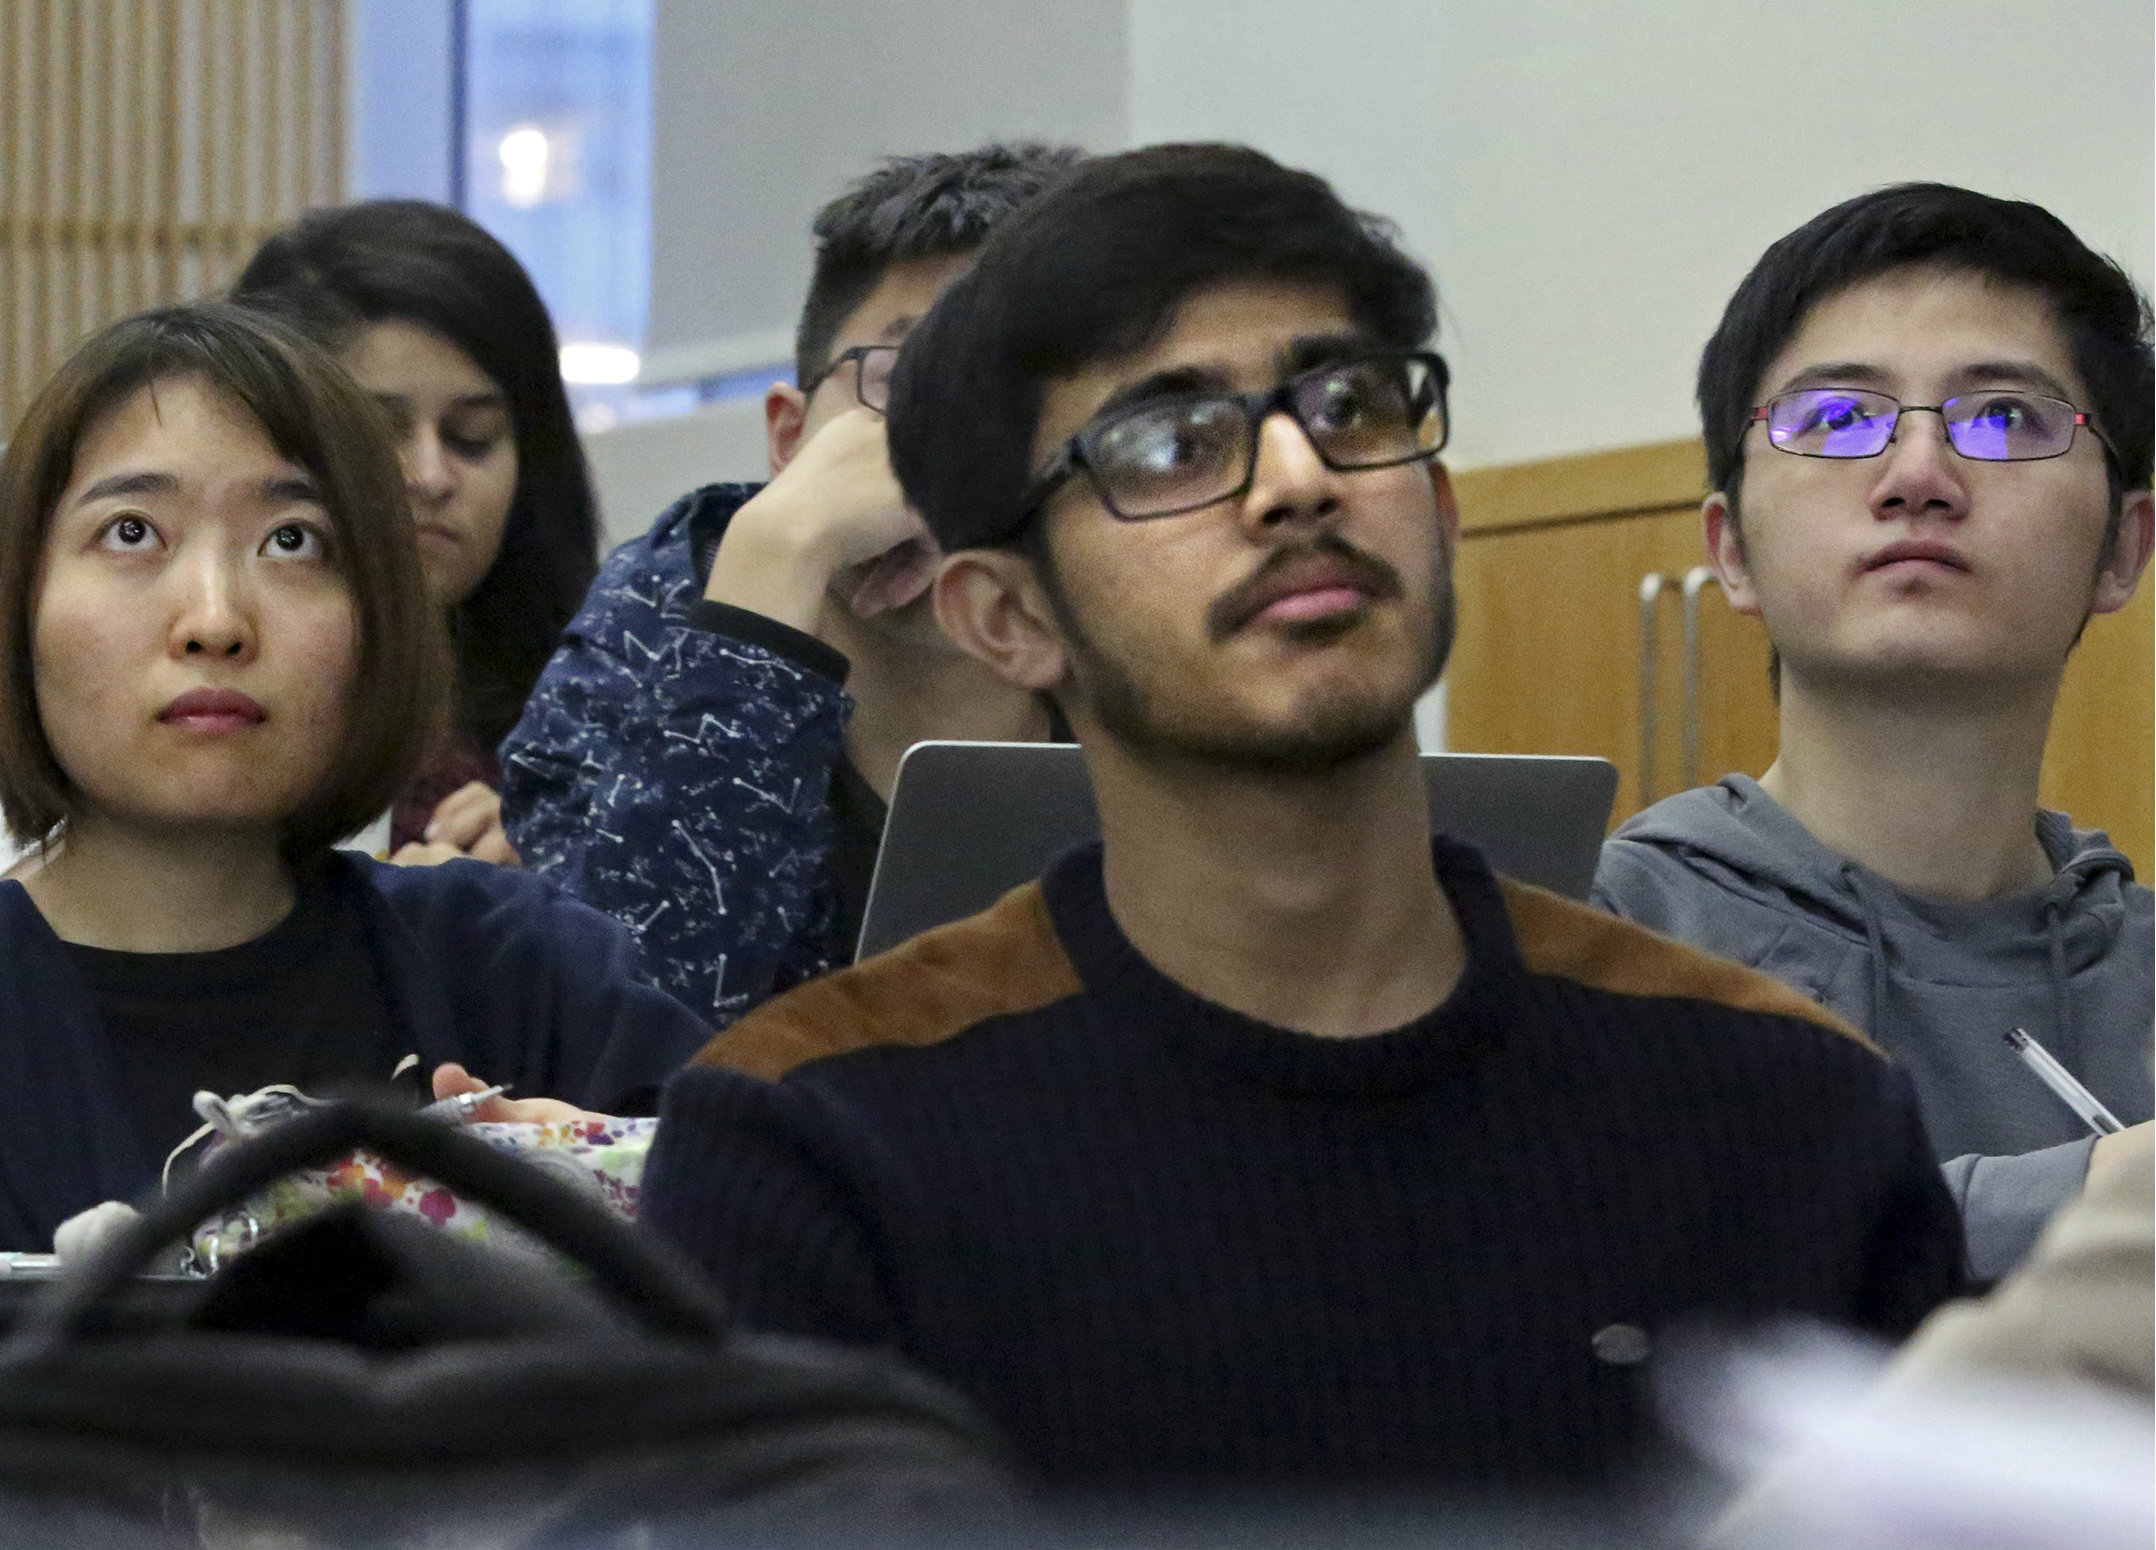 Students at the Tandon School of Engineering